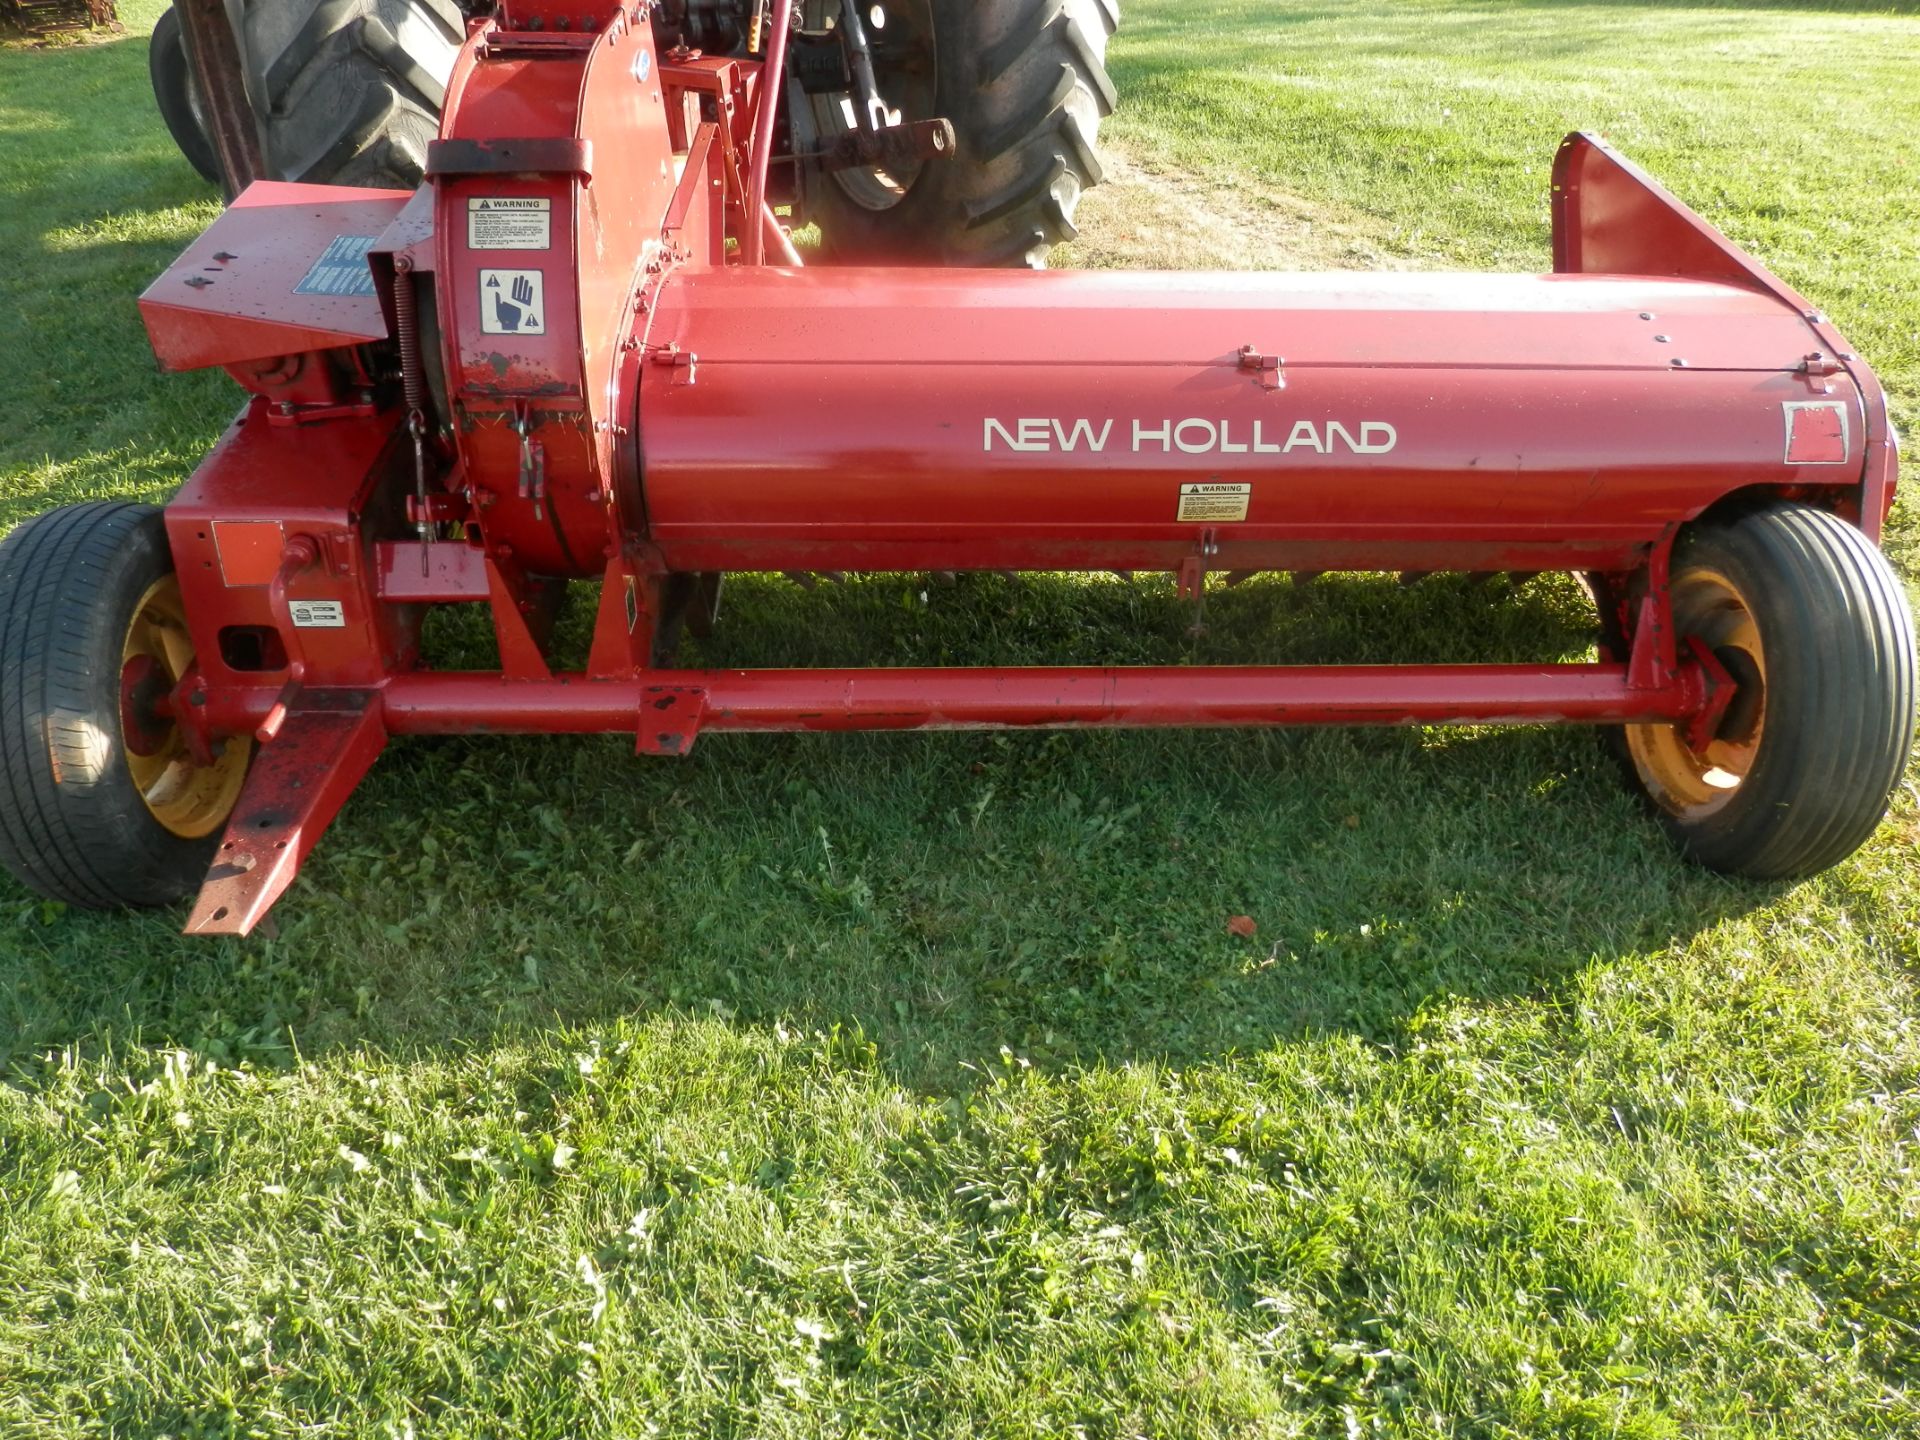 FORD NEW HOLLAND 38 FLAIL CHOPPER - Image 9 of 9